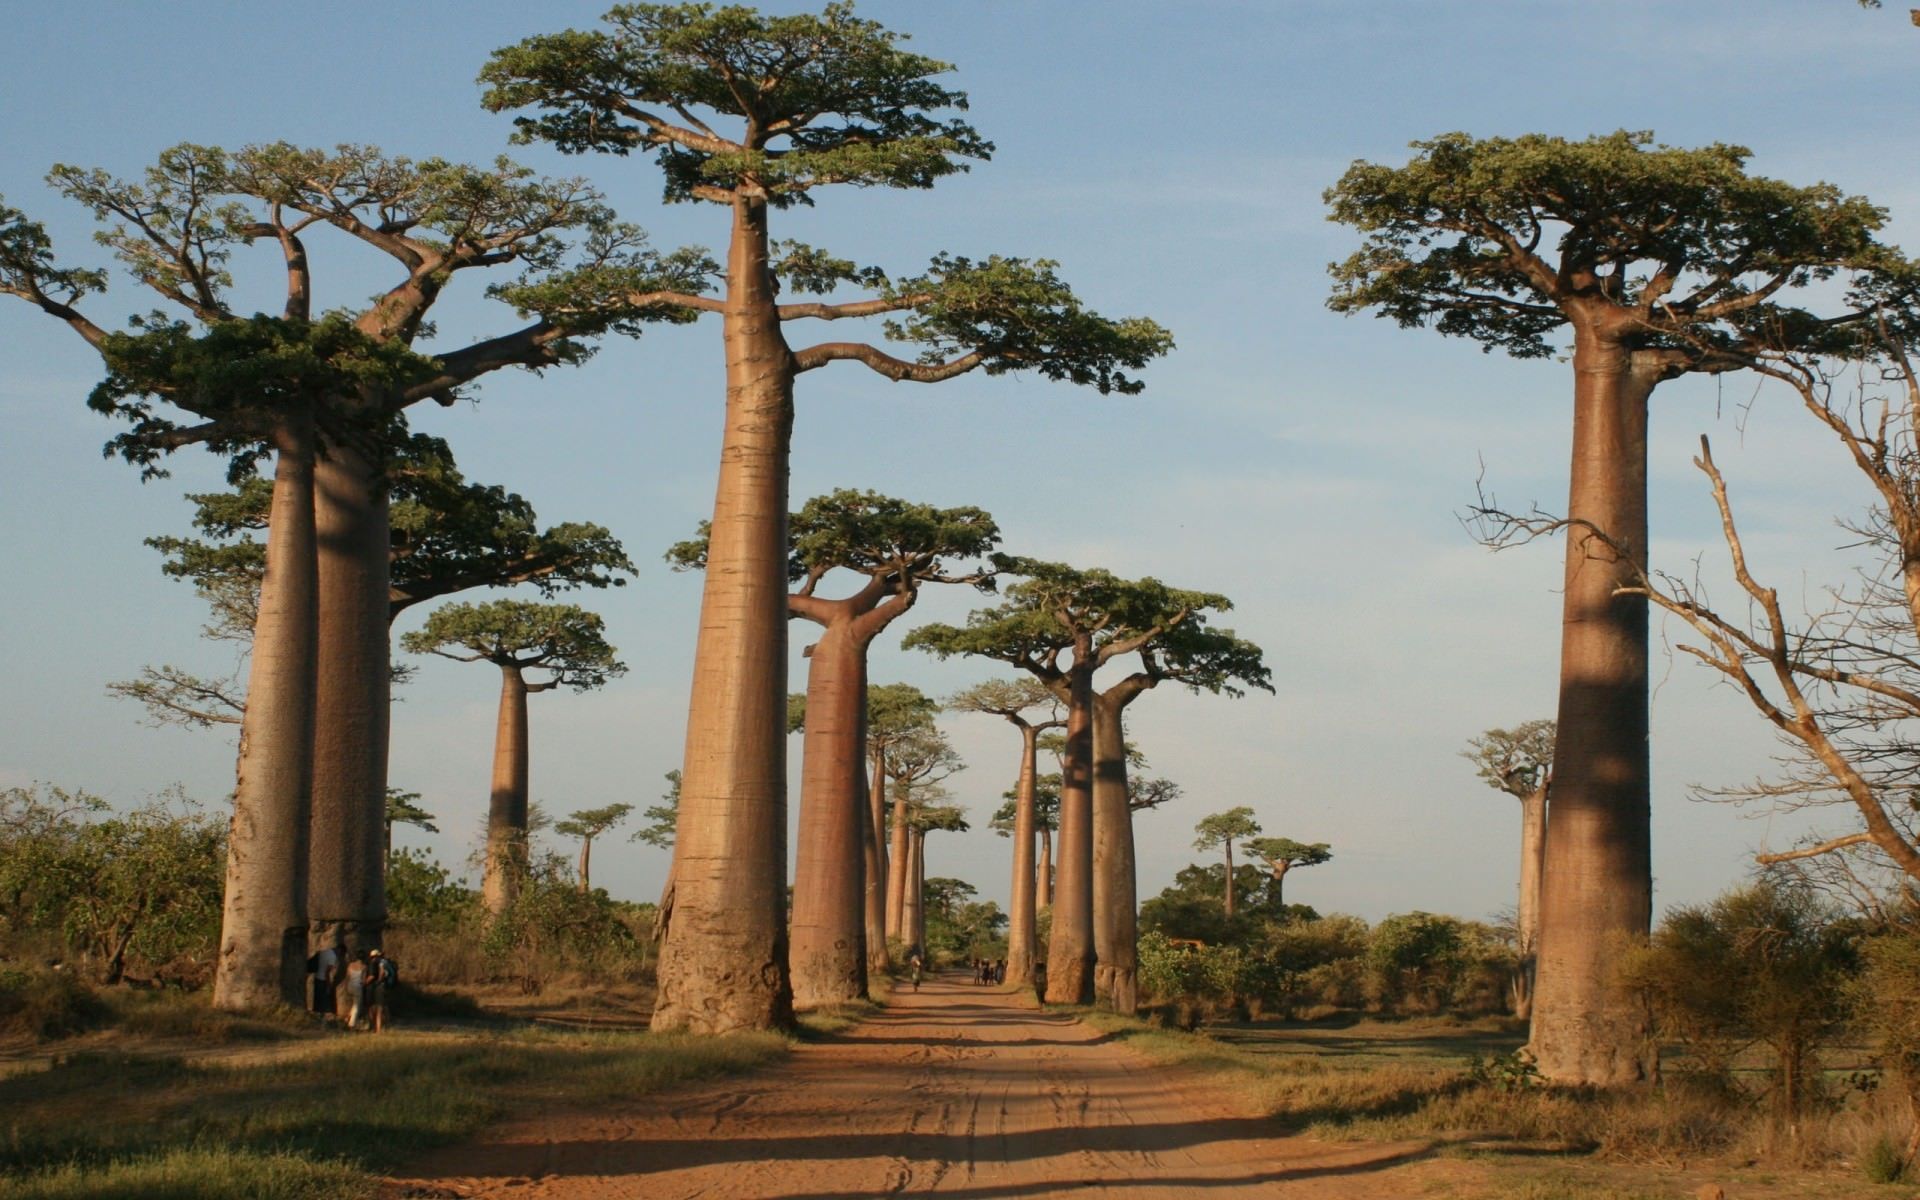 Know more about Baobab (Adansonia)